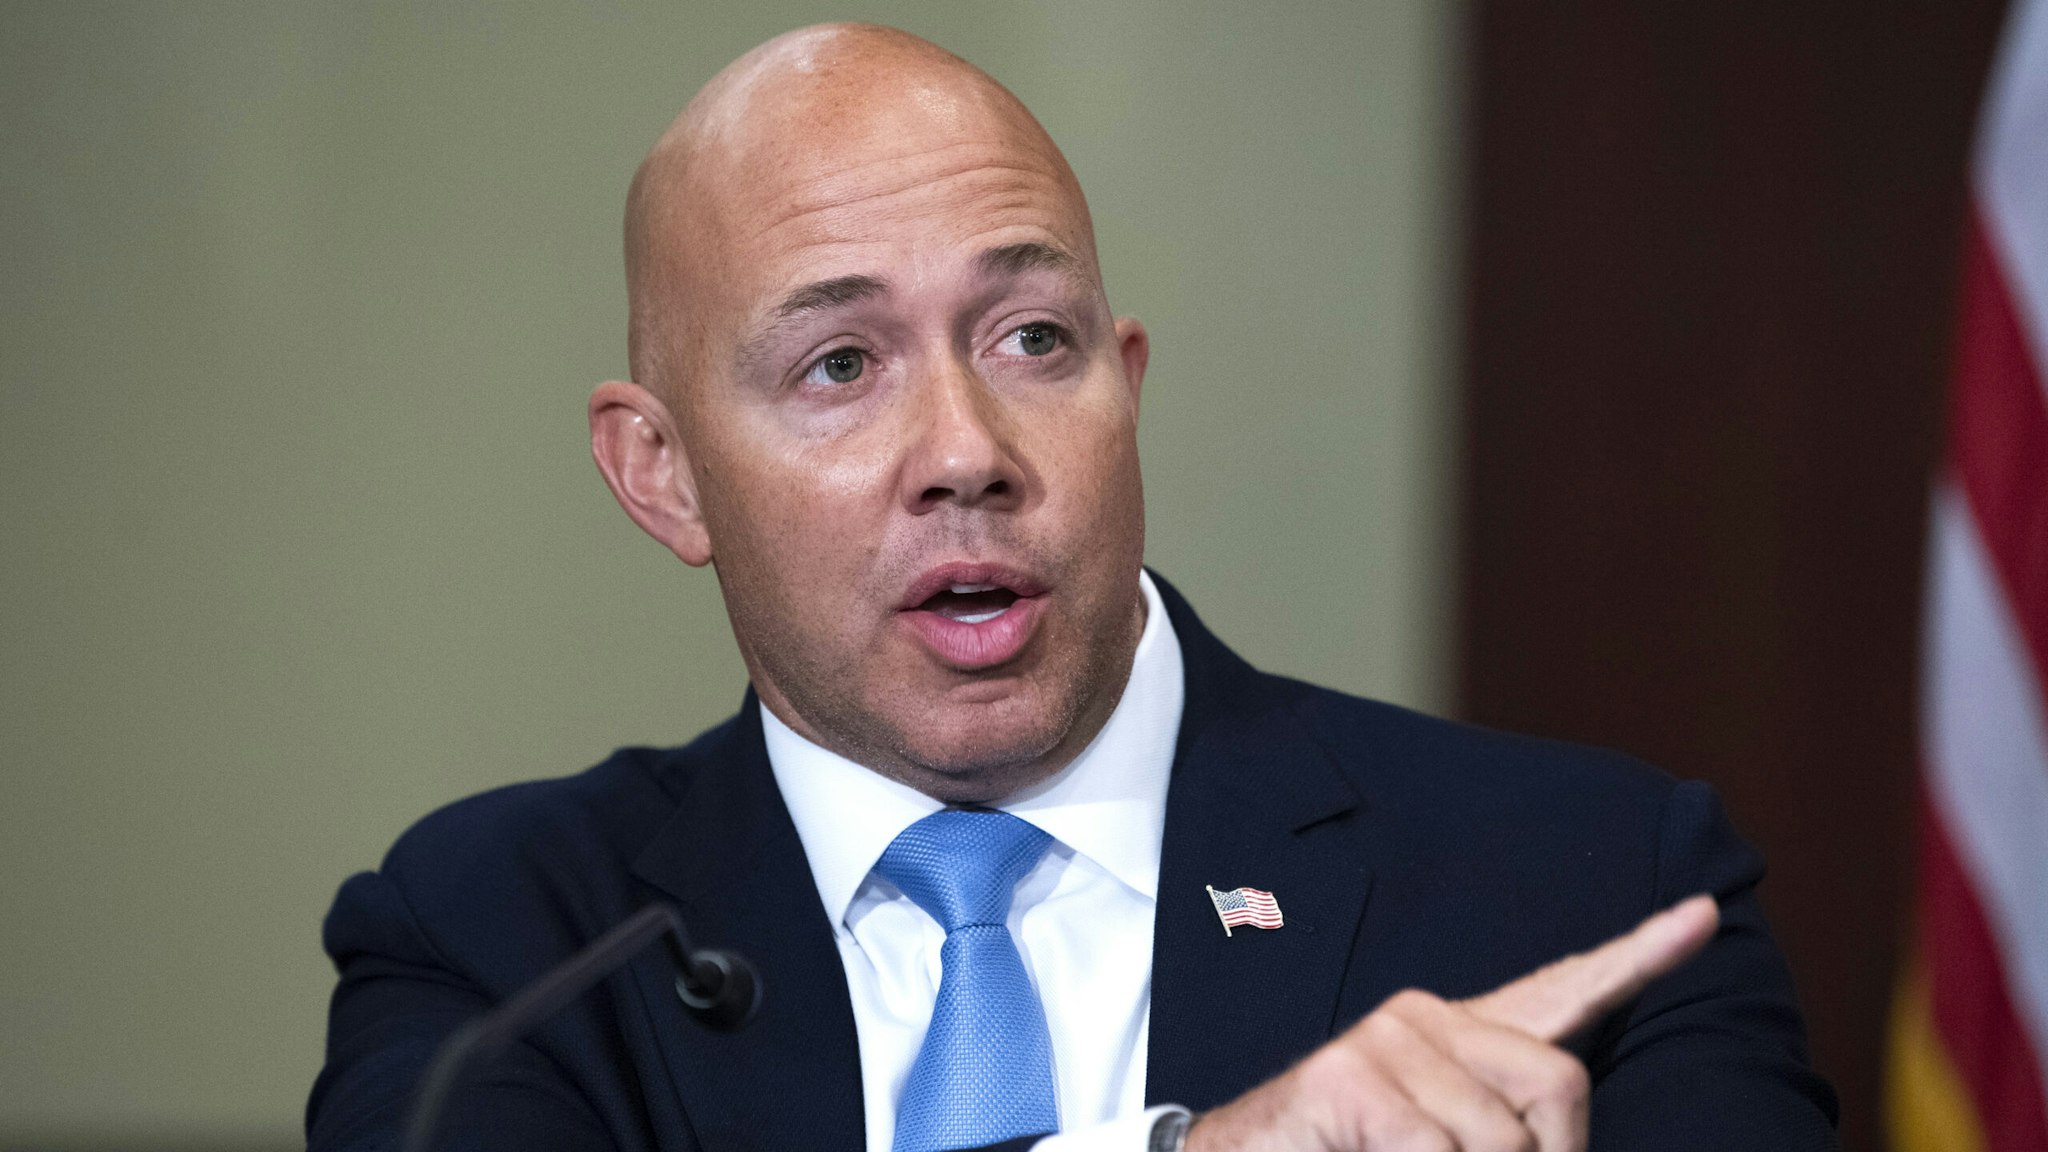 UNITED STATES - AUGUST 30: Rep. Brian Mast, R-Fla., makes remarks during a roundtable discussion with House Republican ranking members and veterans on the U.S. withdrawal from Afghanistan in the Capitol Visitor Center on Monday, August 30, 2021.